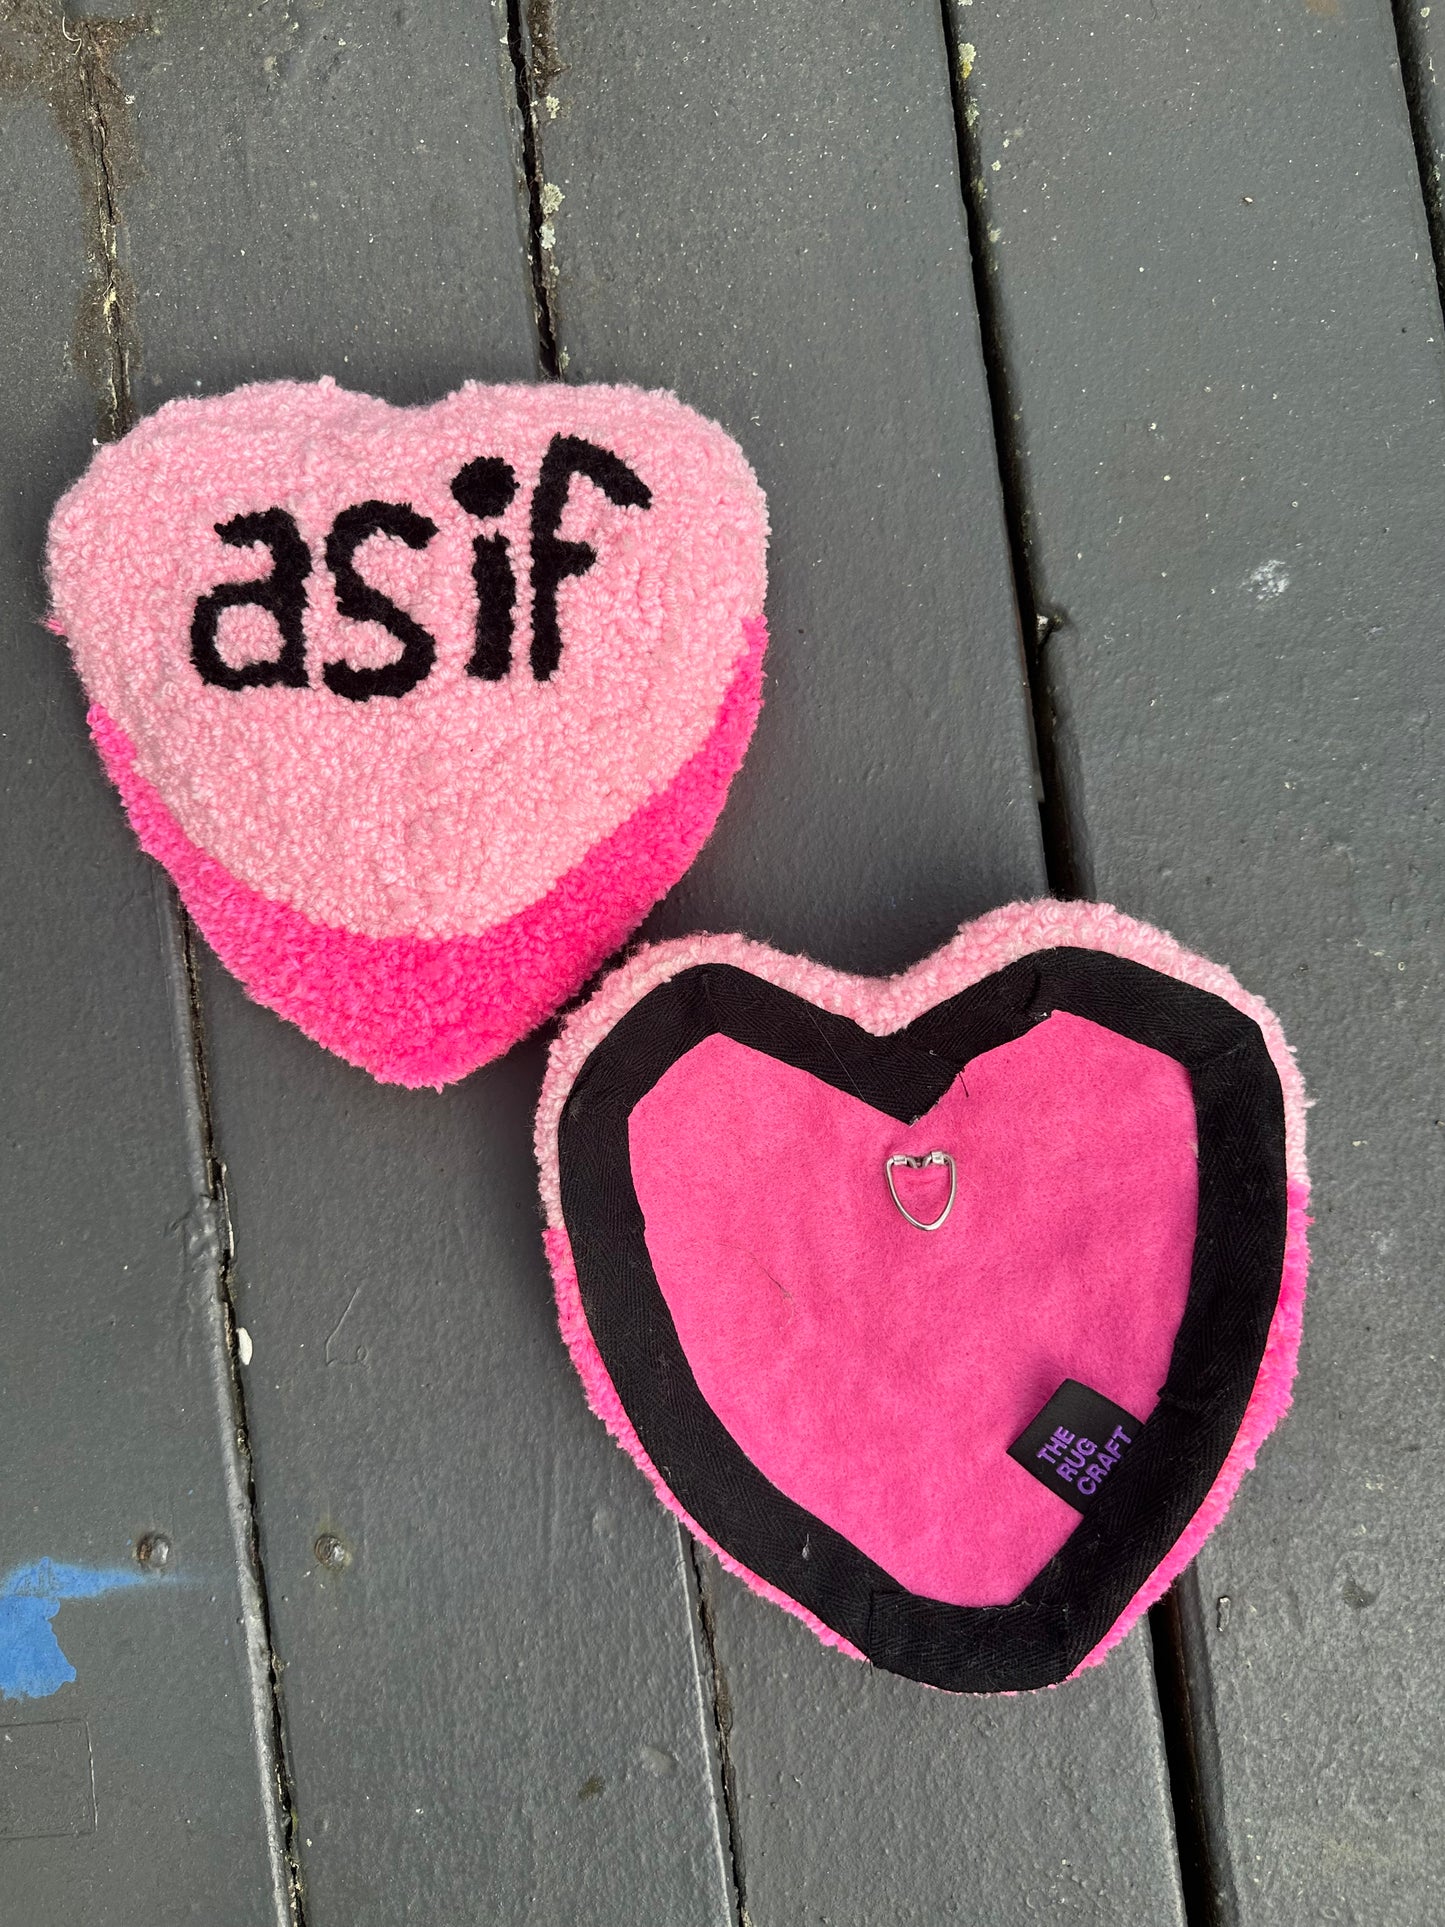 “as if” candy heart hanging